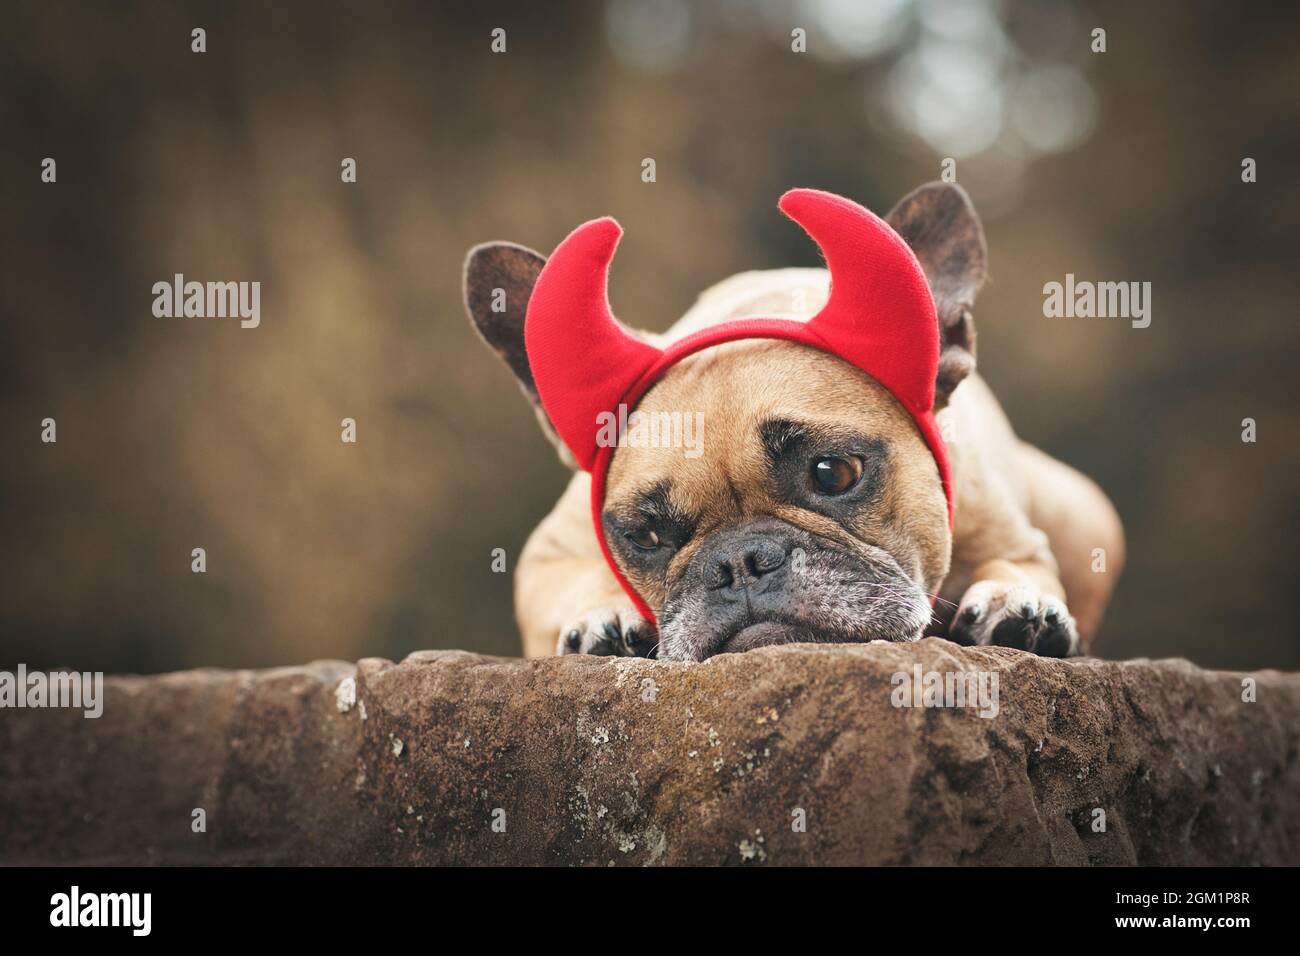 Cute French Bulldog dog wearing Halloween costume with red devil horns and tail Stock Photo